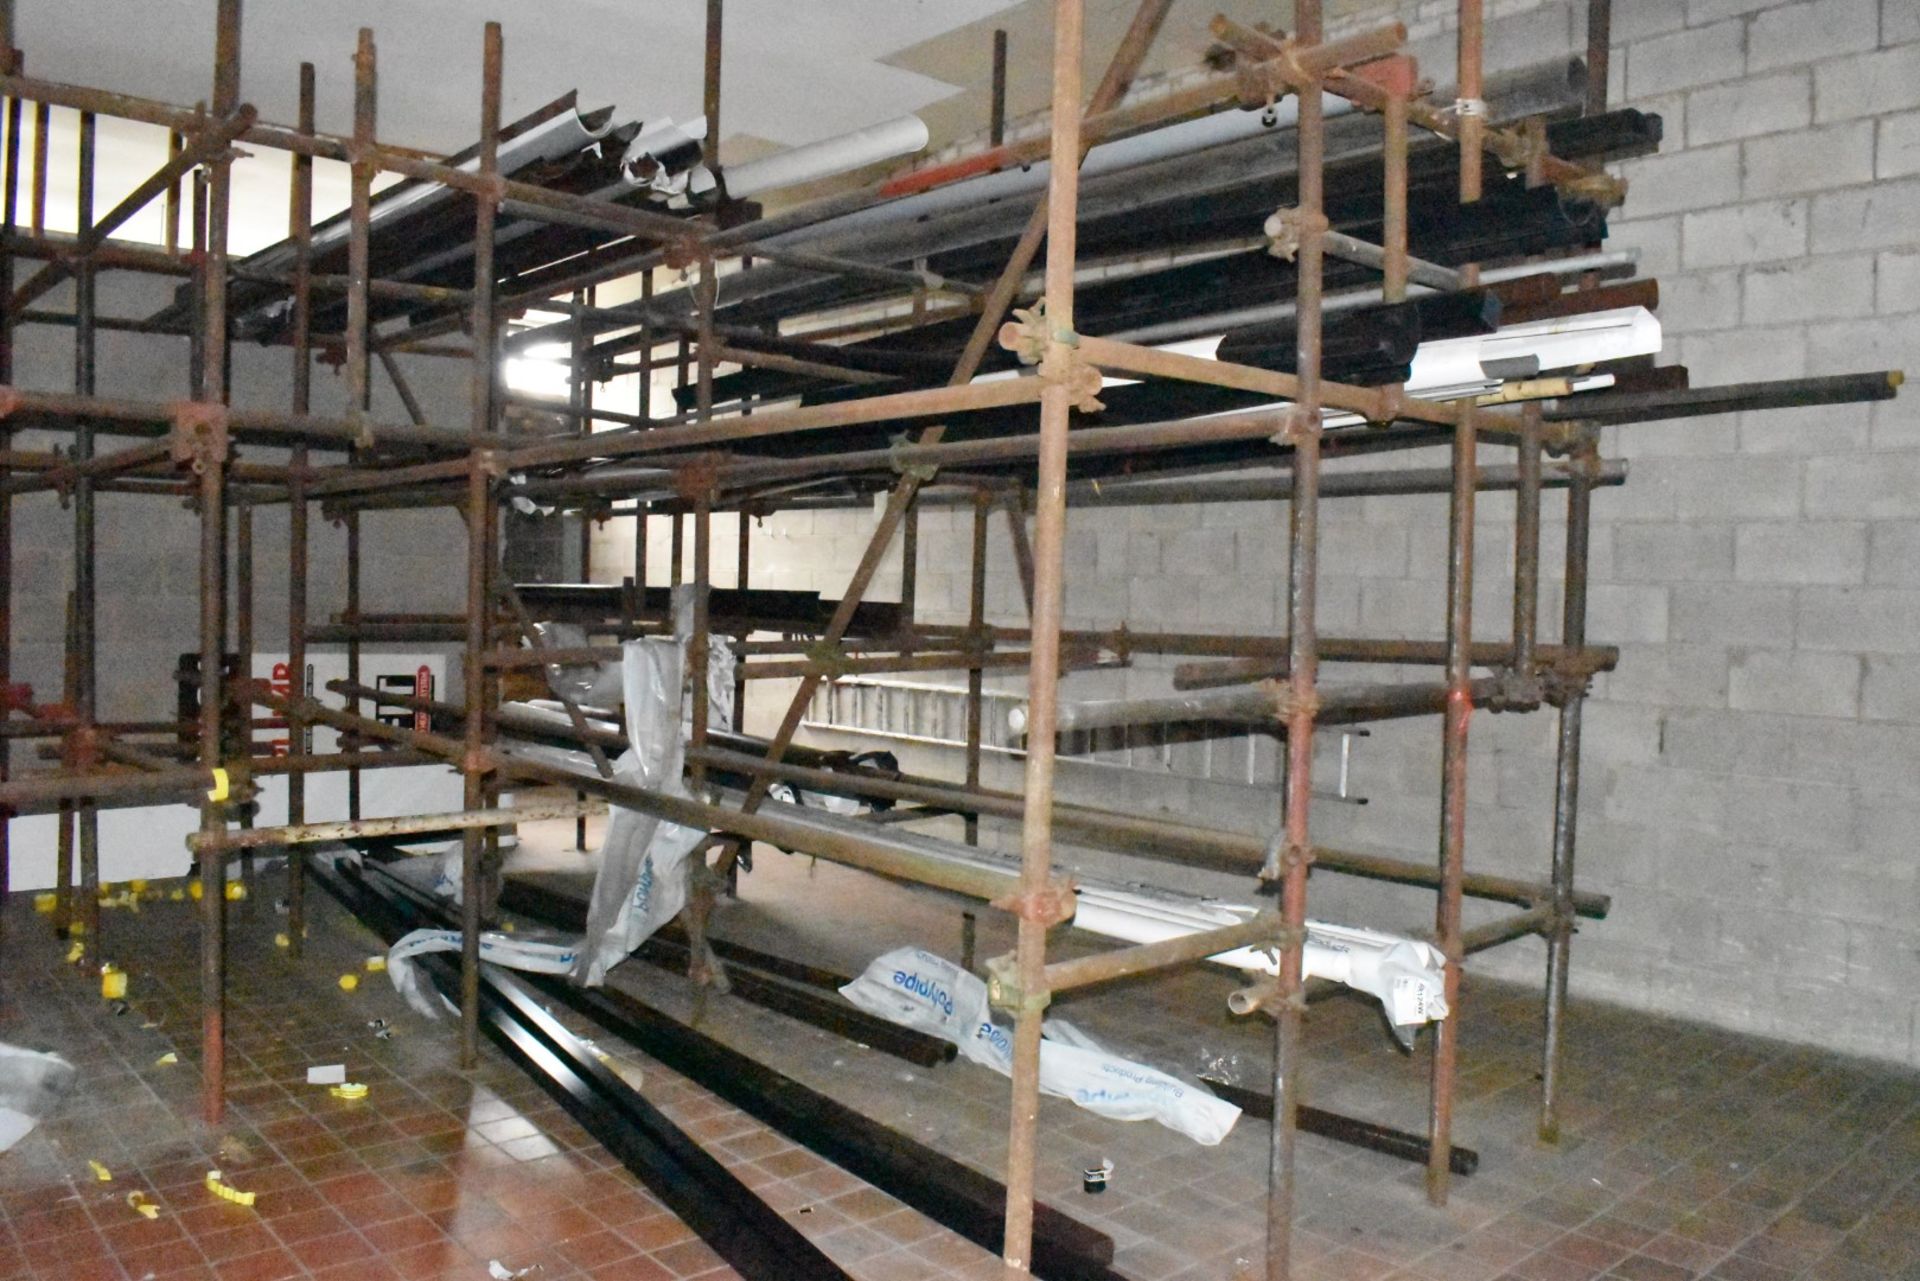 1 x Large Collection of Scaffolding and Fixtures Covering a Floor Space of Approx 13 x 13ft - Image 7 of 15